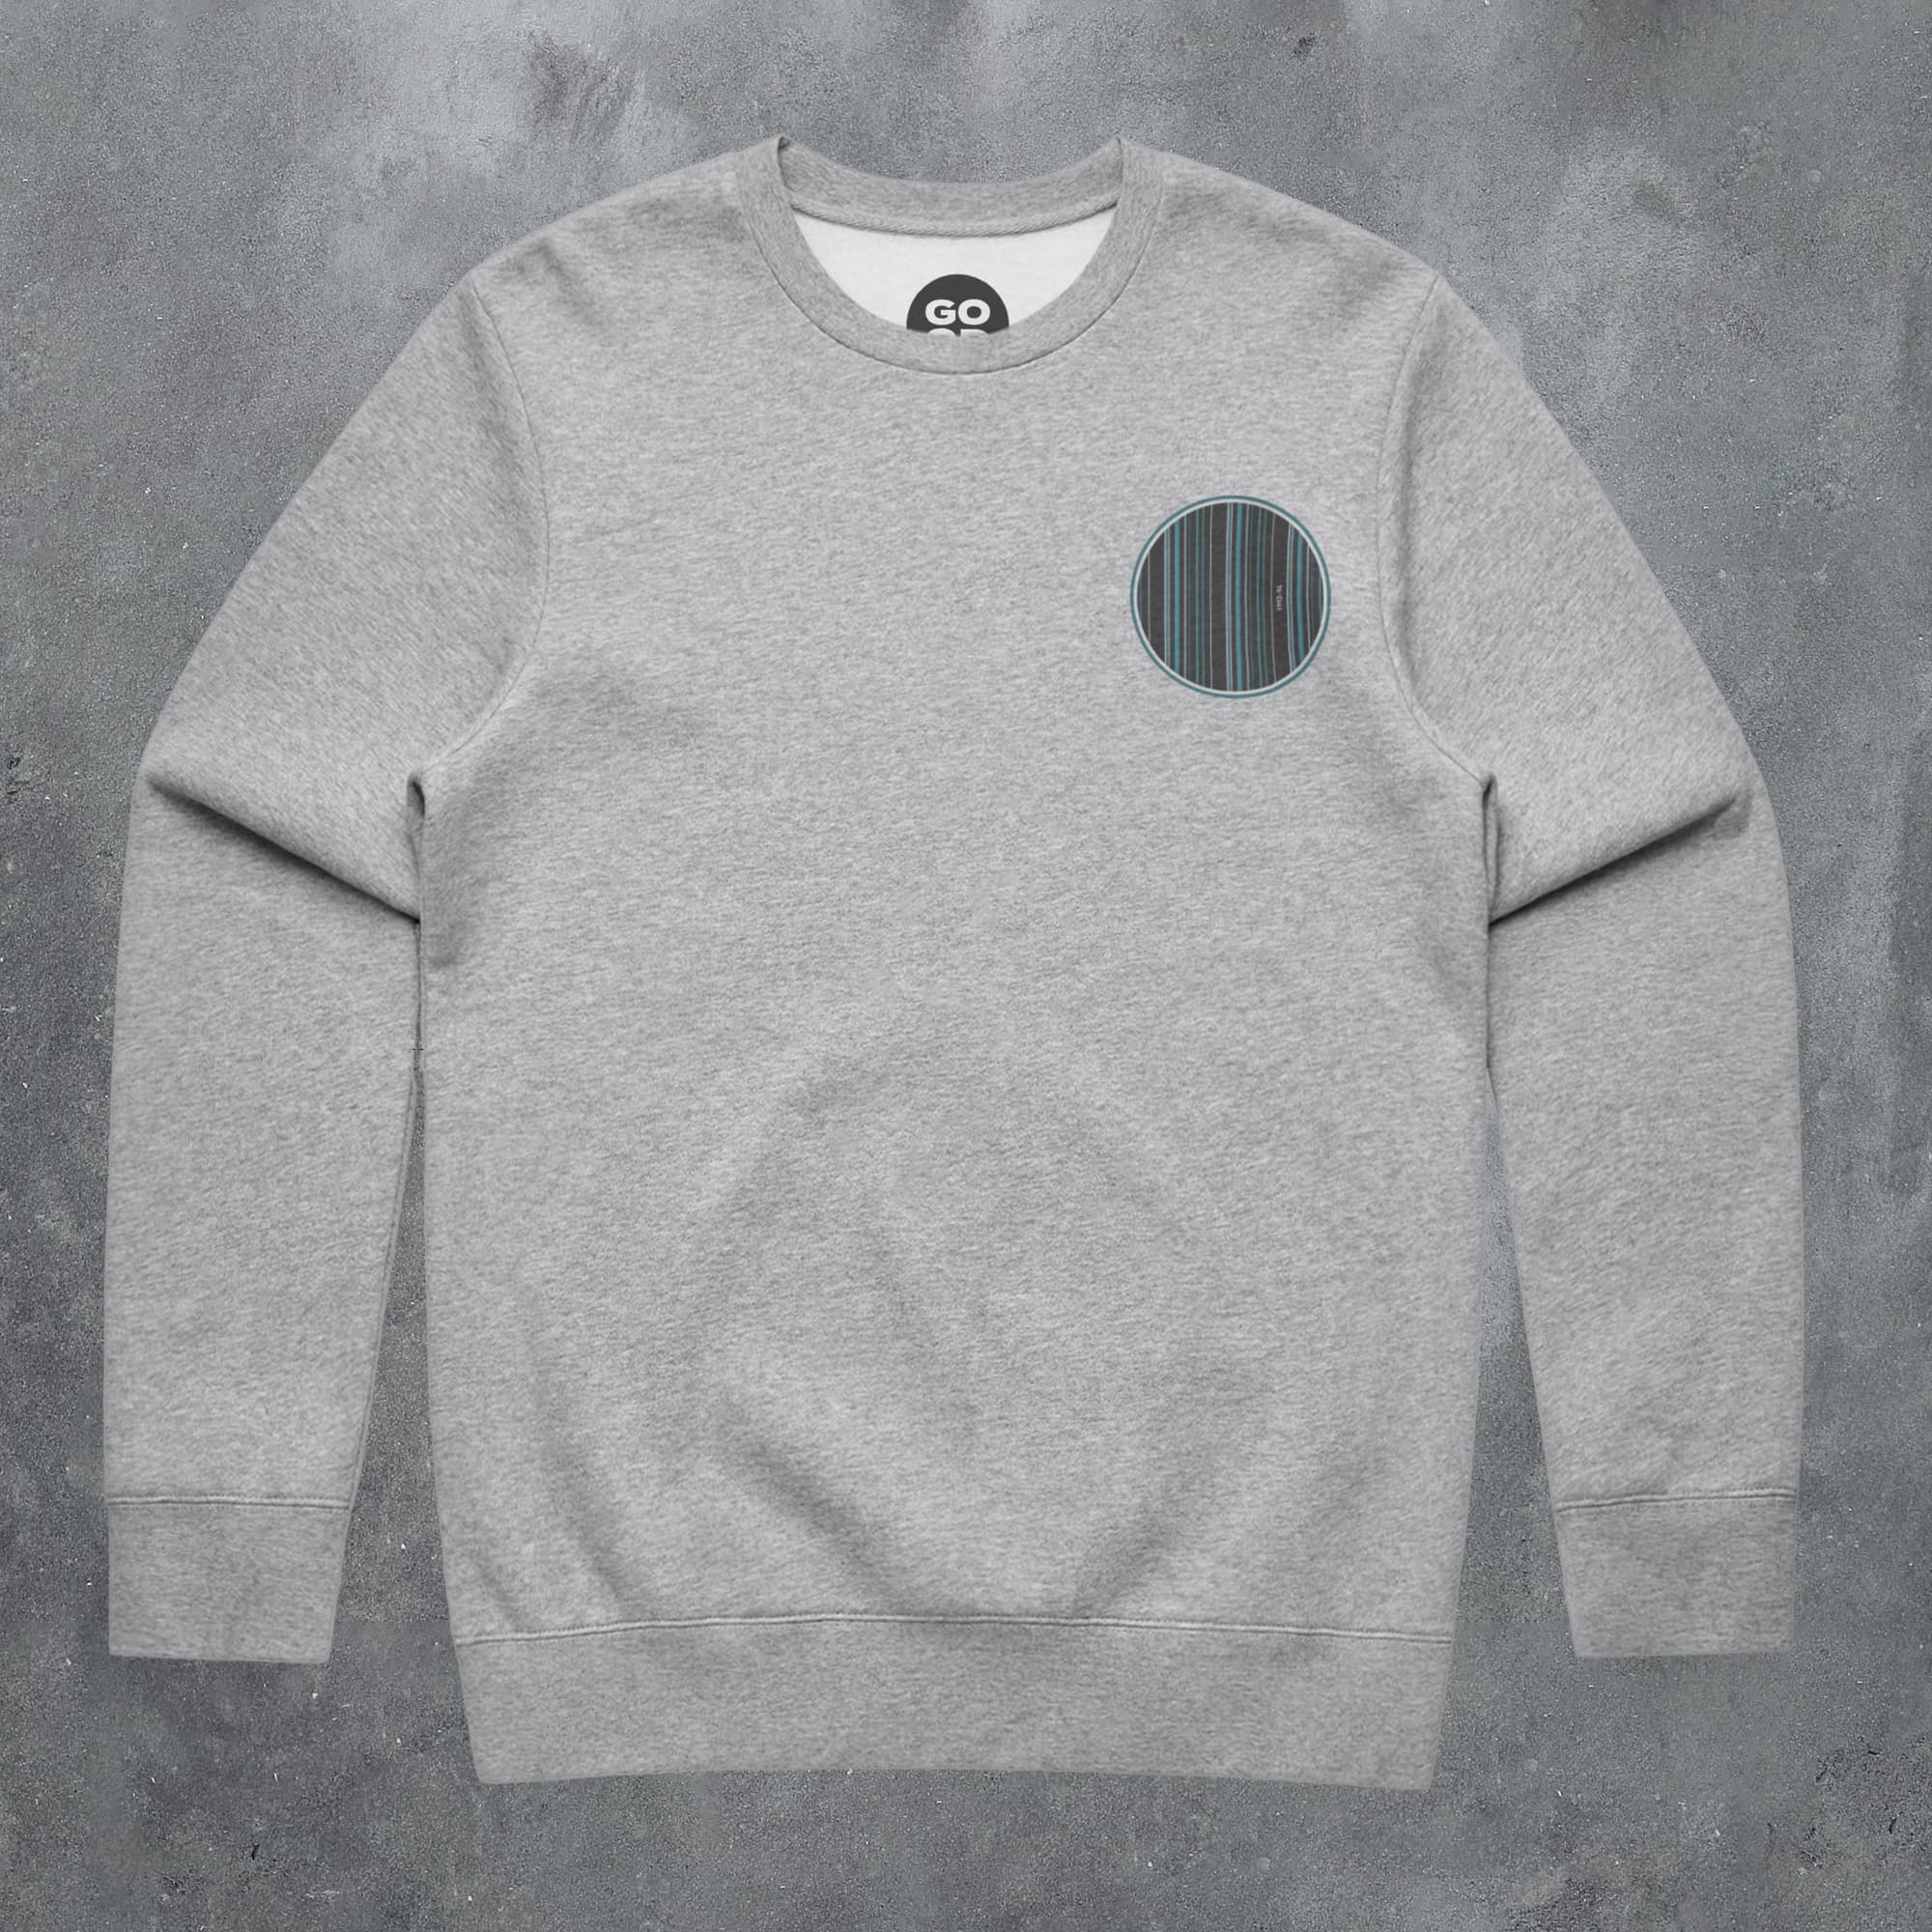 a grey sweatshirt with a black circle on the front